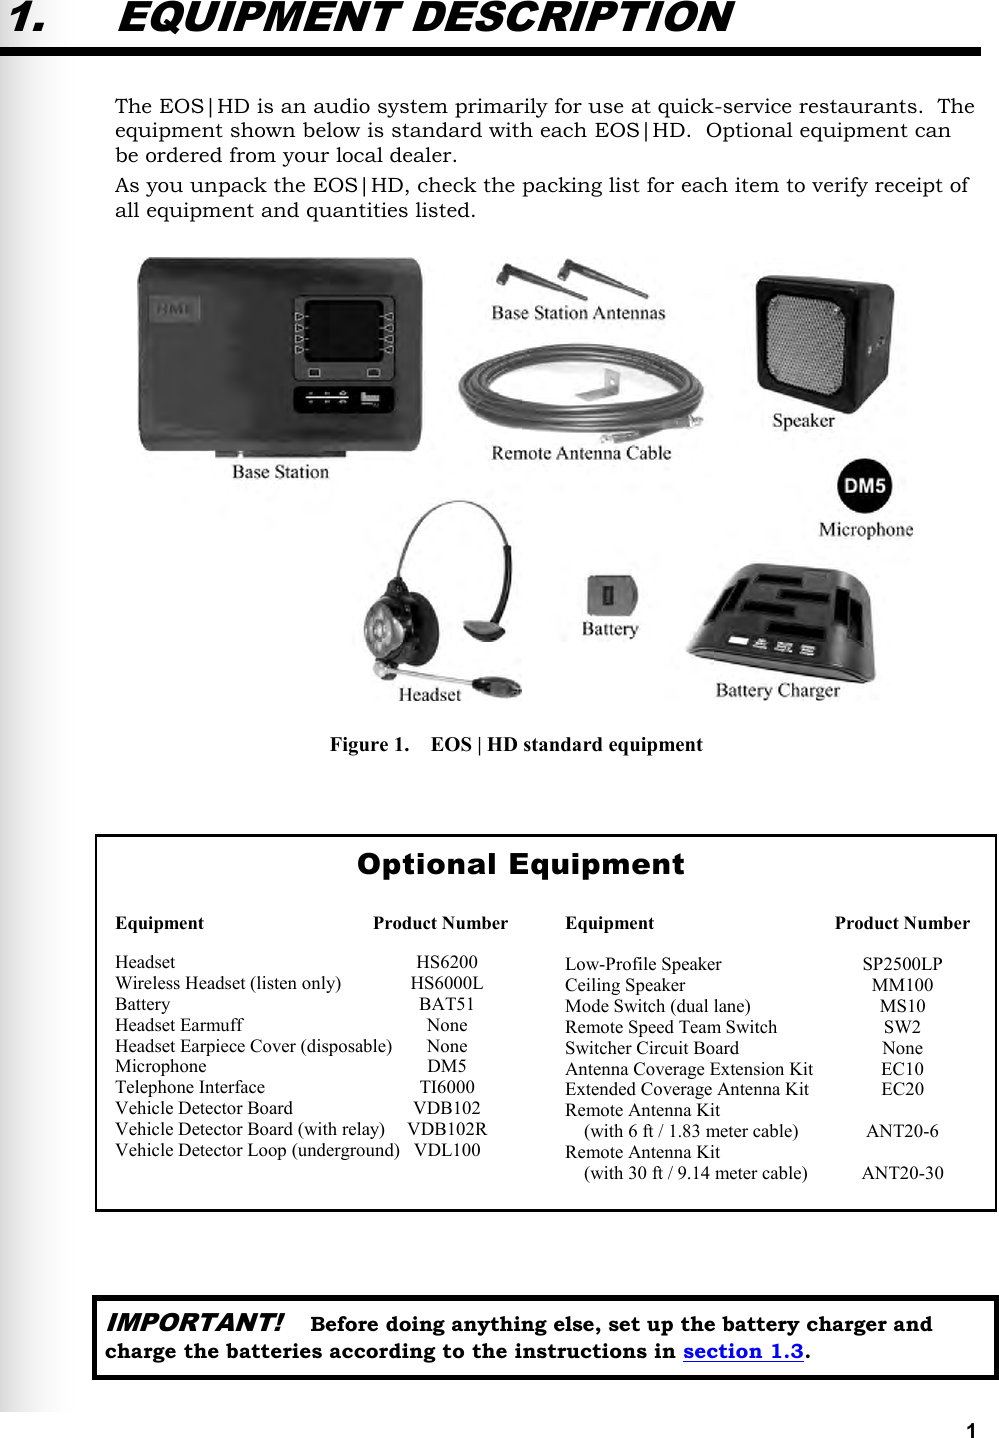   1 1. EQUIPMENT DESCRIPTION The EOS|HD is an audio system primarily for use at quick-service restaurants.  The equipment shown below is standard with each EOS|HD.  Optional equipment can be ordered from your local dealer.   As you unpack the EOS|HD, check the packing list for each item to verify receipt of all equipment and quantities listed.                            Optional Equipment  Equipment  Product Number  Headset  HS6200 Wireless Headset (listen only)  HS6000L Battery  BAT51 Headset Earmuff  None Headset Earpiece Cover (disposable)  None Microphone  DM5 Telephone Interface  TI6000 Vehicle Detector Board  VDB102  Vehicle Detector Board (with relay)  VDB102R Vehicle Detector Loop (underground)  VDL100 Equipment  Product Number  Low-Profile Speaker  SP2500LP Ceiling Speaker  MM100 Mode Switch (dual lane)  MS10 Remote Speed Team Switch  SW2 Switcher Circuit Board  None  Antenna Coverage Extension Kit  EC10  Extended Coverage Antenna Kit  EC20 Remote Antenna Kit      (with 6 ft / 1.83 meter cable)  ANT20-6 Remote Antenna Kit      (with 30 ft / 9.14 meter cable)  ANT20-30   IMPORTANT!    Before doing anything else, set up the battery charger and charge the batteries according to the instructions in section 1.3. Figure 1.    EOS | HD standard equipment 